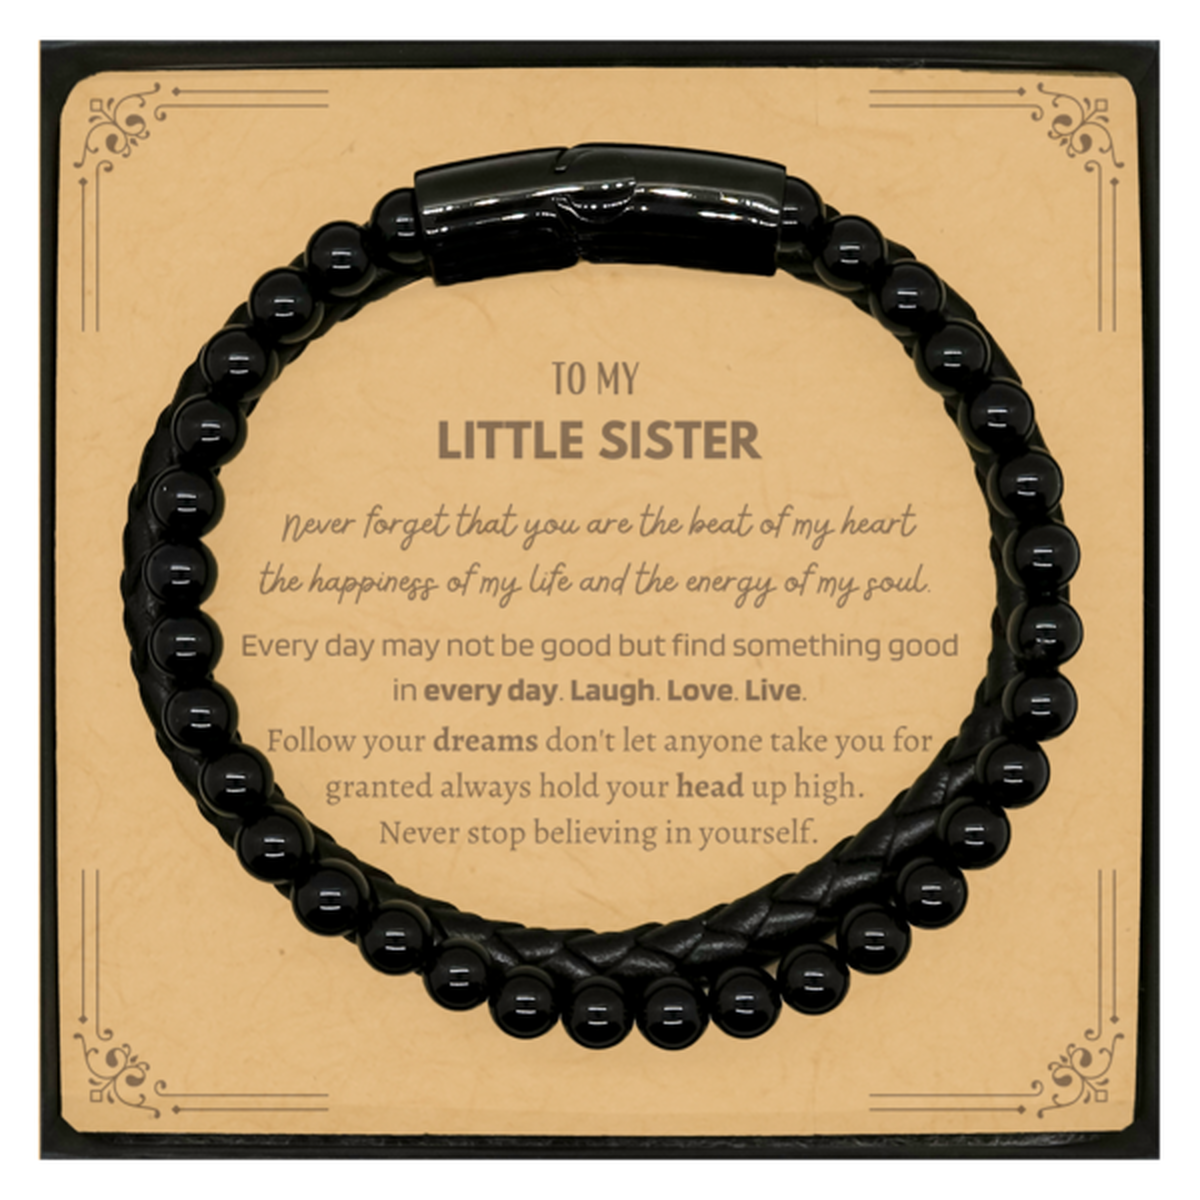 To My Little Sister Message Card Gifts, Christmas Little Sister Stone Leather Bracelets Present, Birthday Unique Motivational For Little Sister, To My Little Sister Never forget that you are the beat of my heart the happiness of my life and the energy of